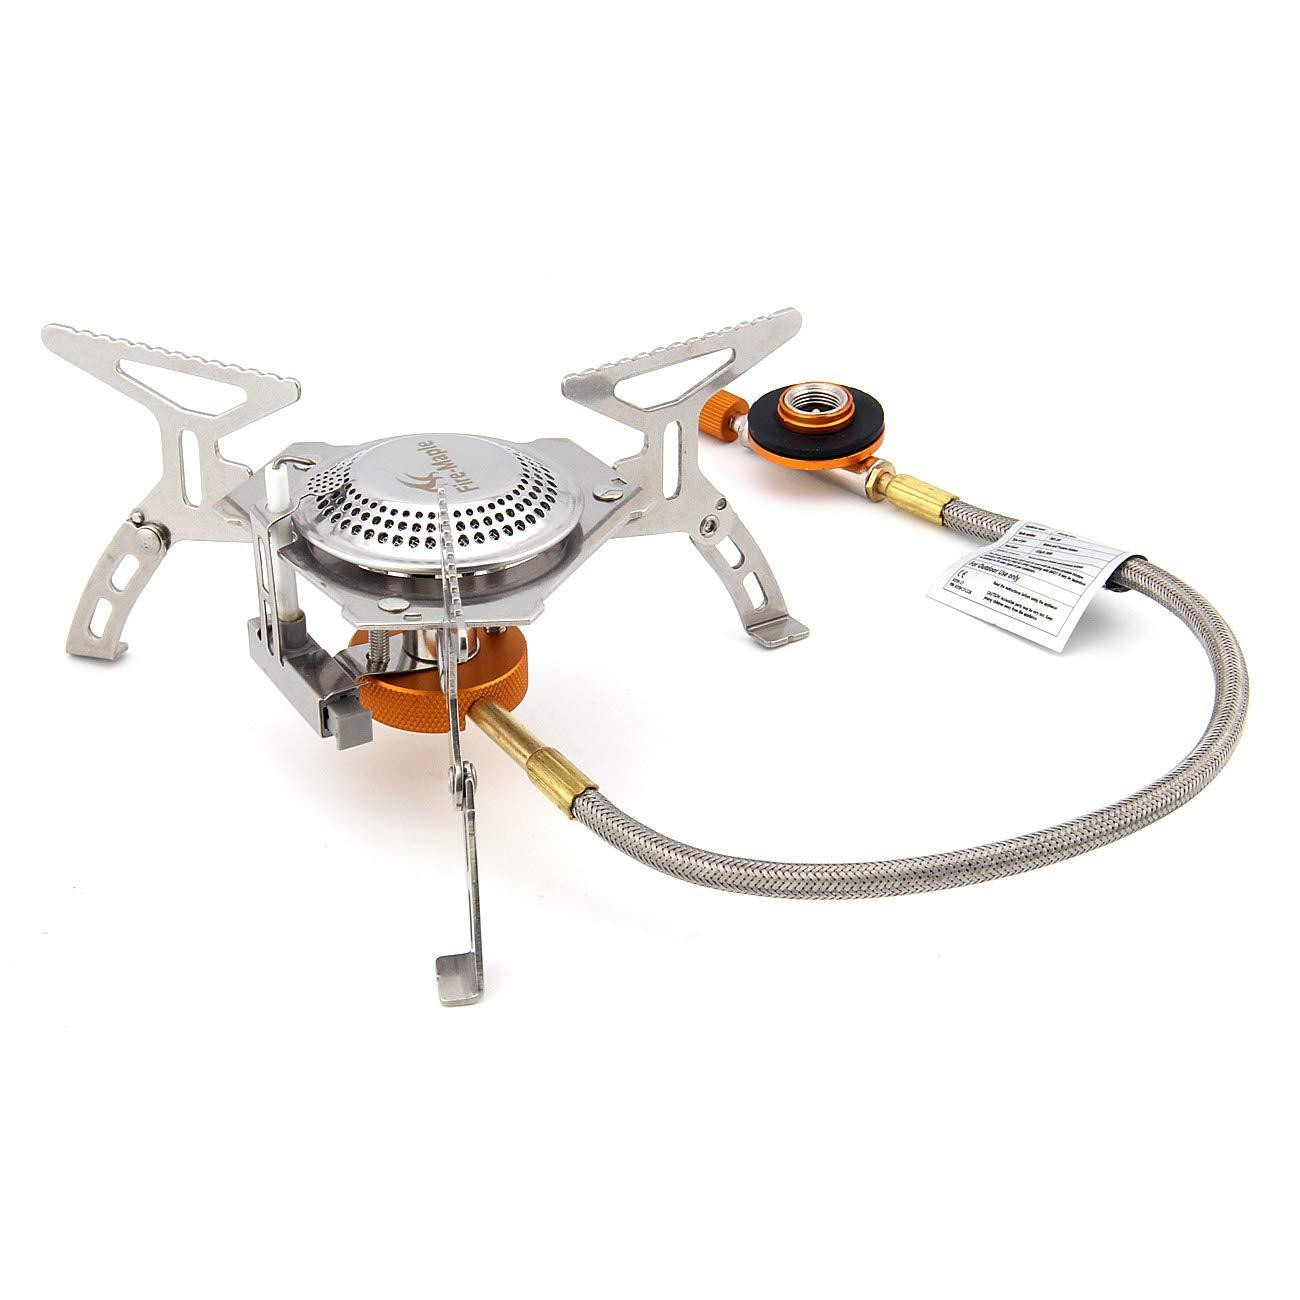 Fire Maple FMS 105 2600W Portable Outdoor Gas Stove